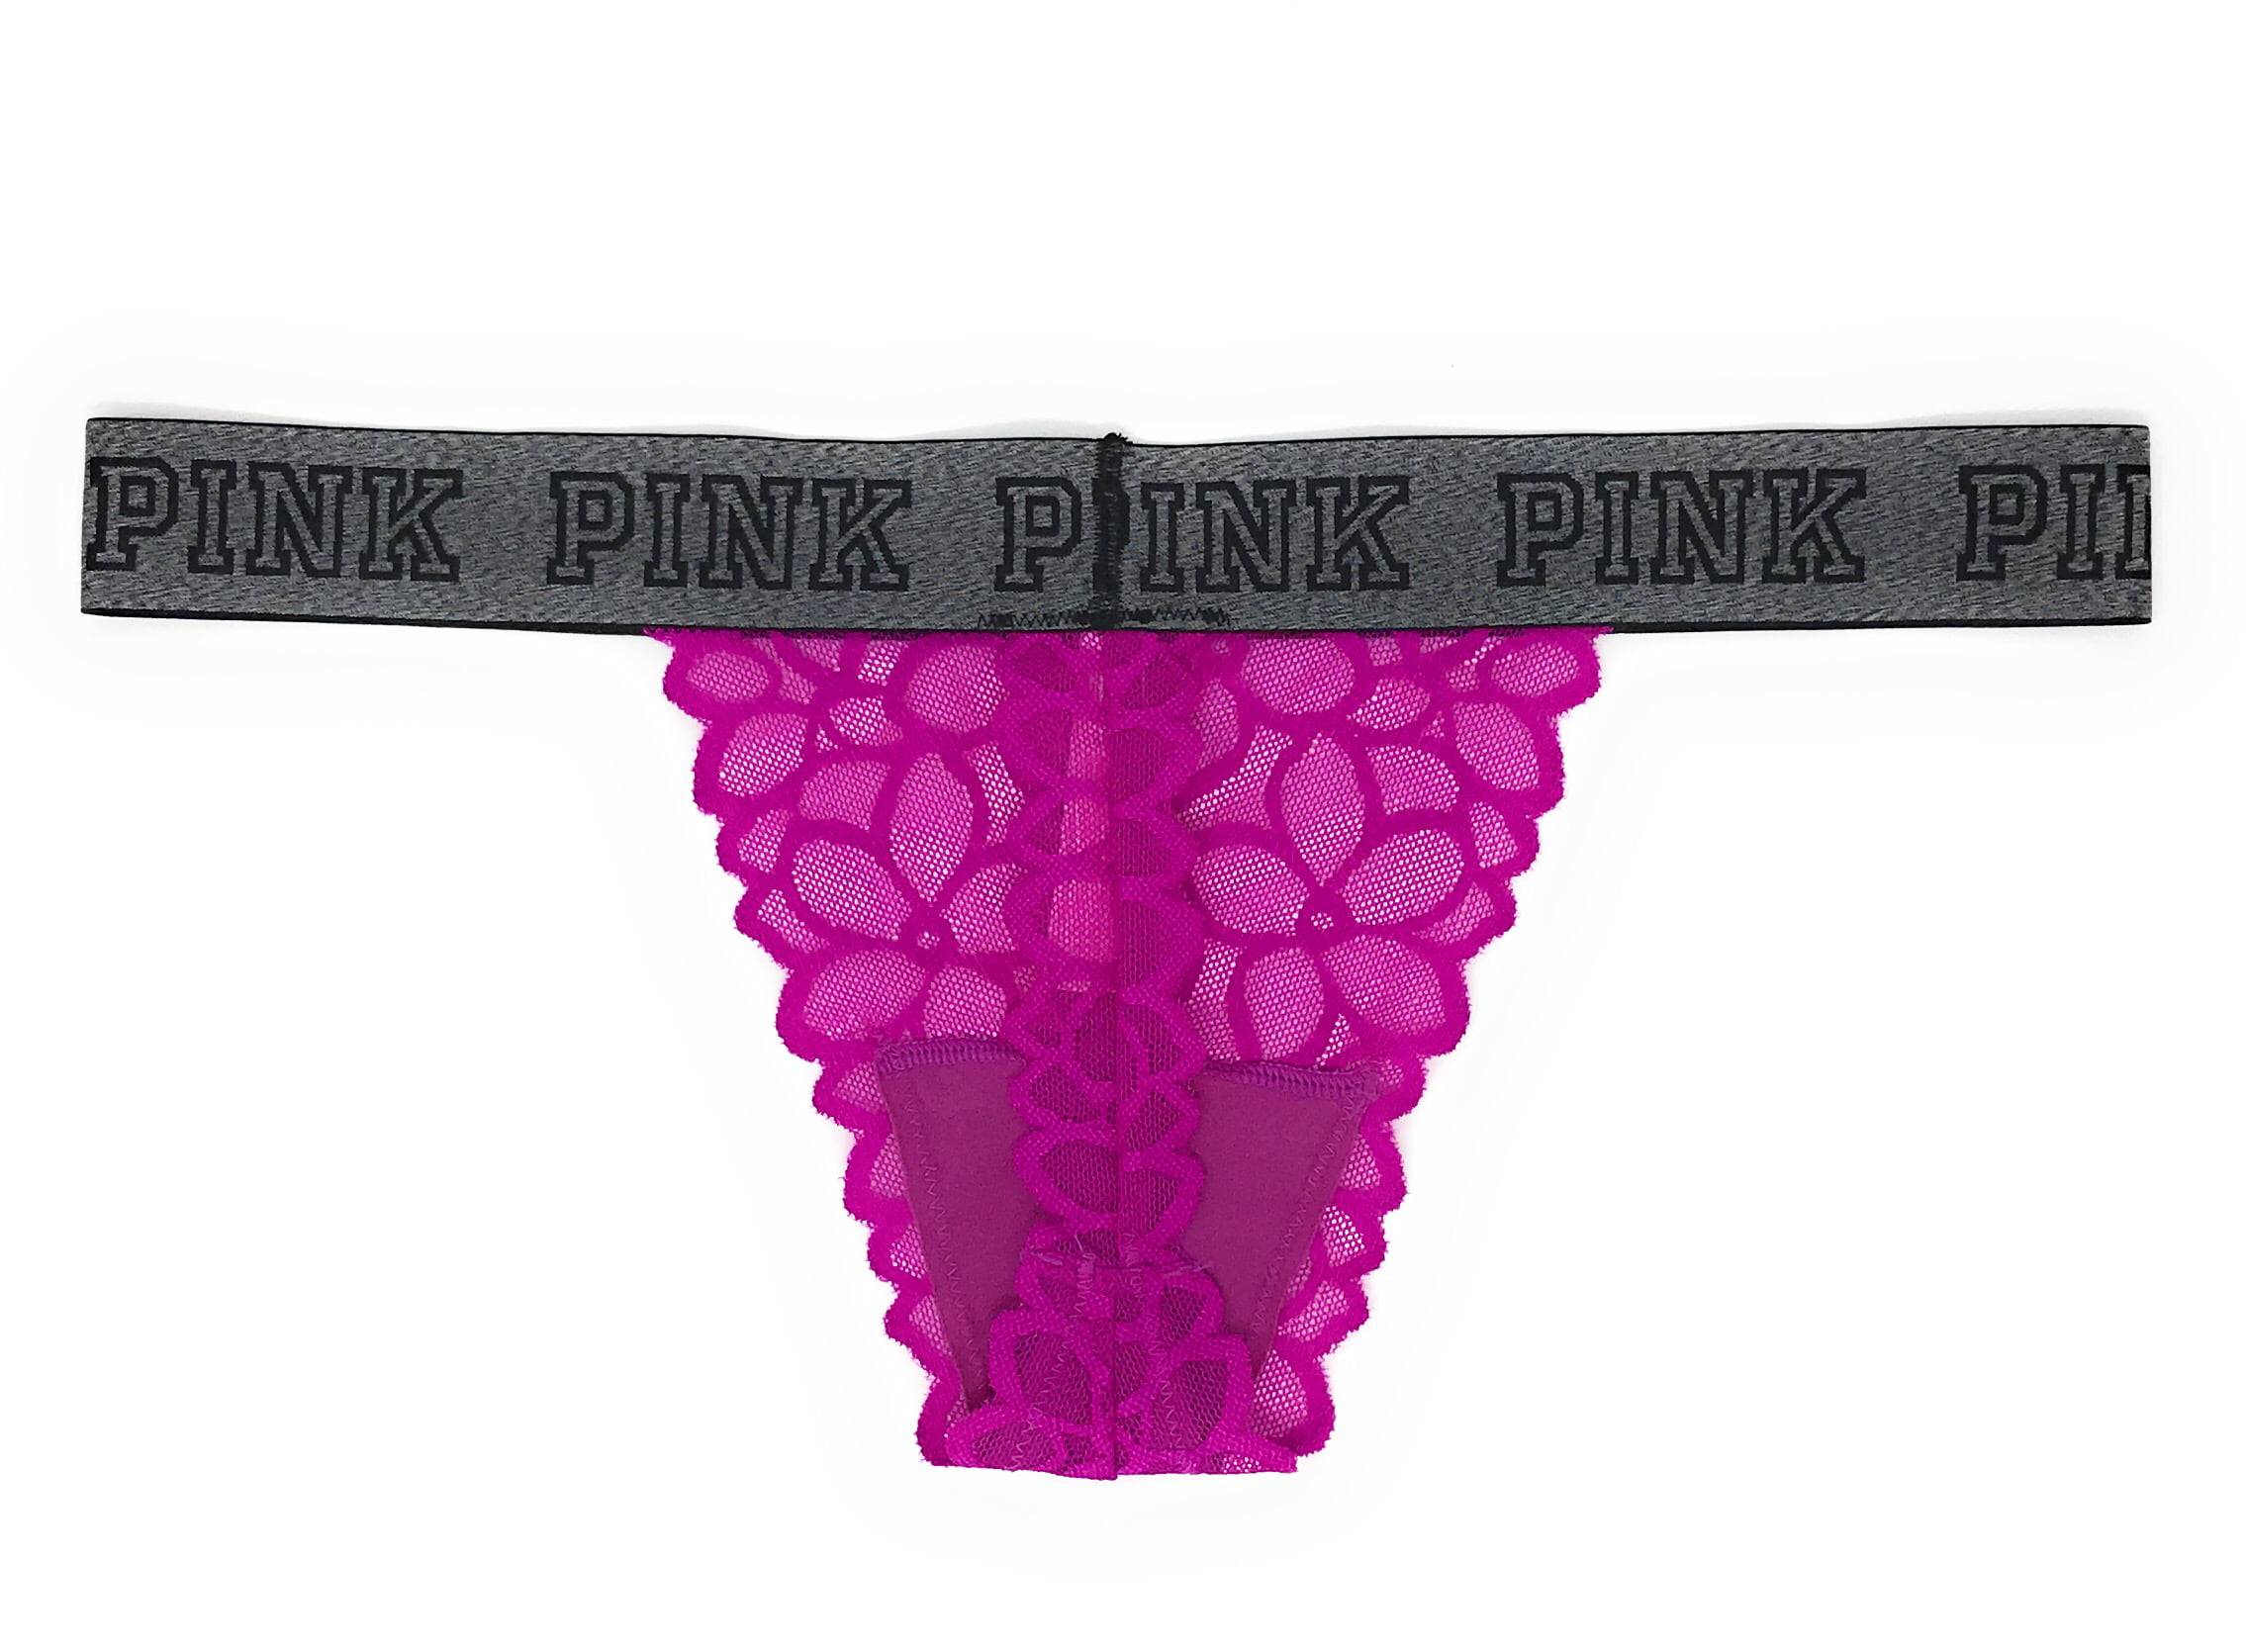 Victoria's Secret PINK - These panties are really calling our name 😜 s. vspink.com/PINKPanties